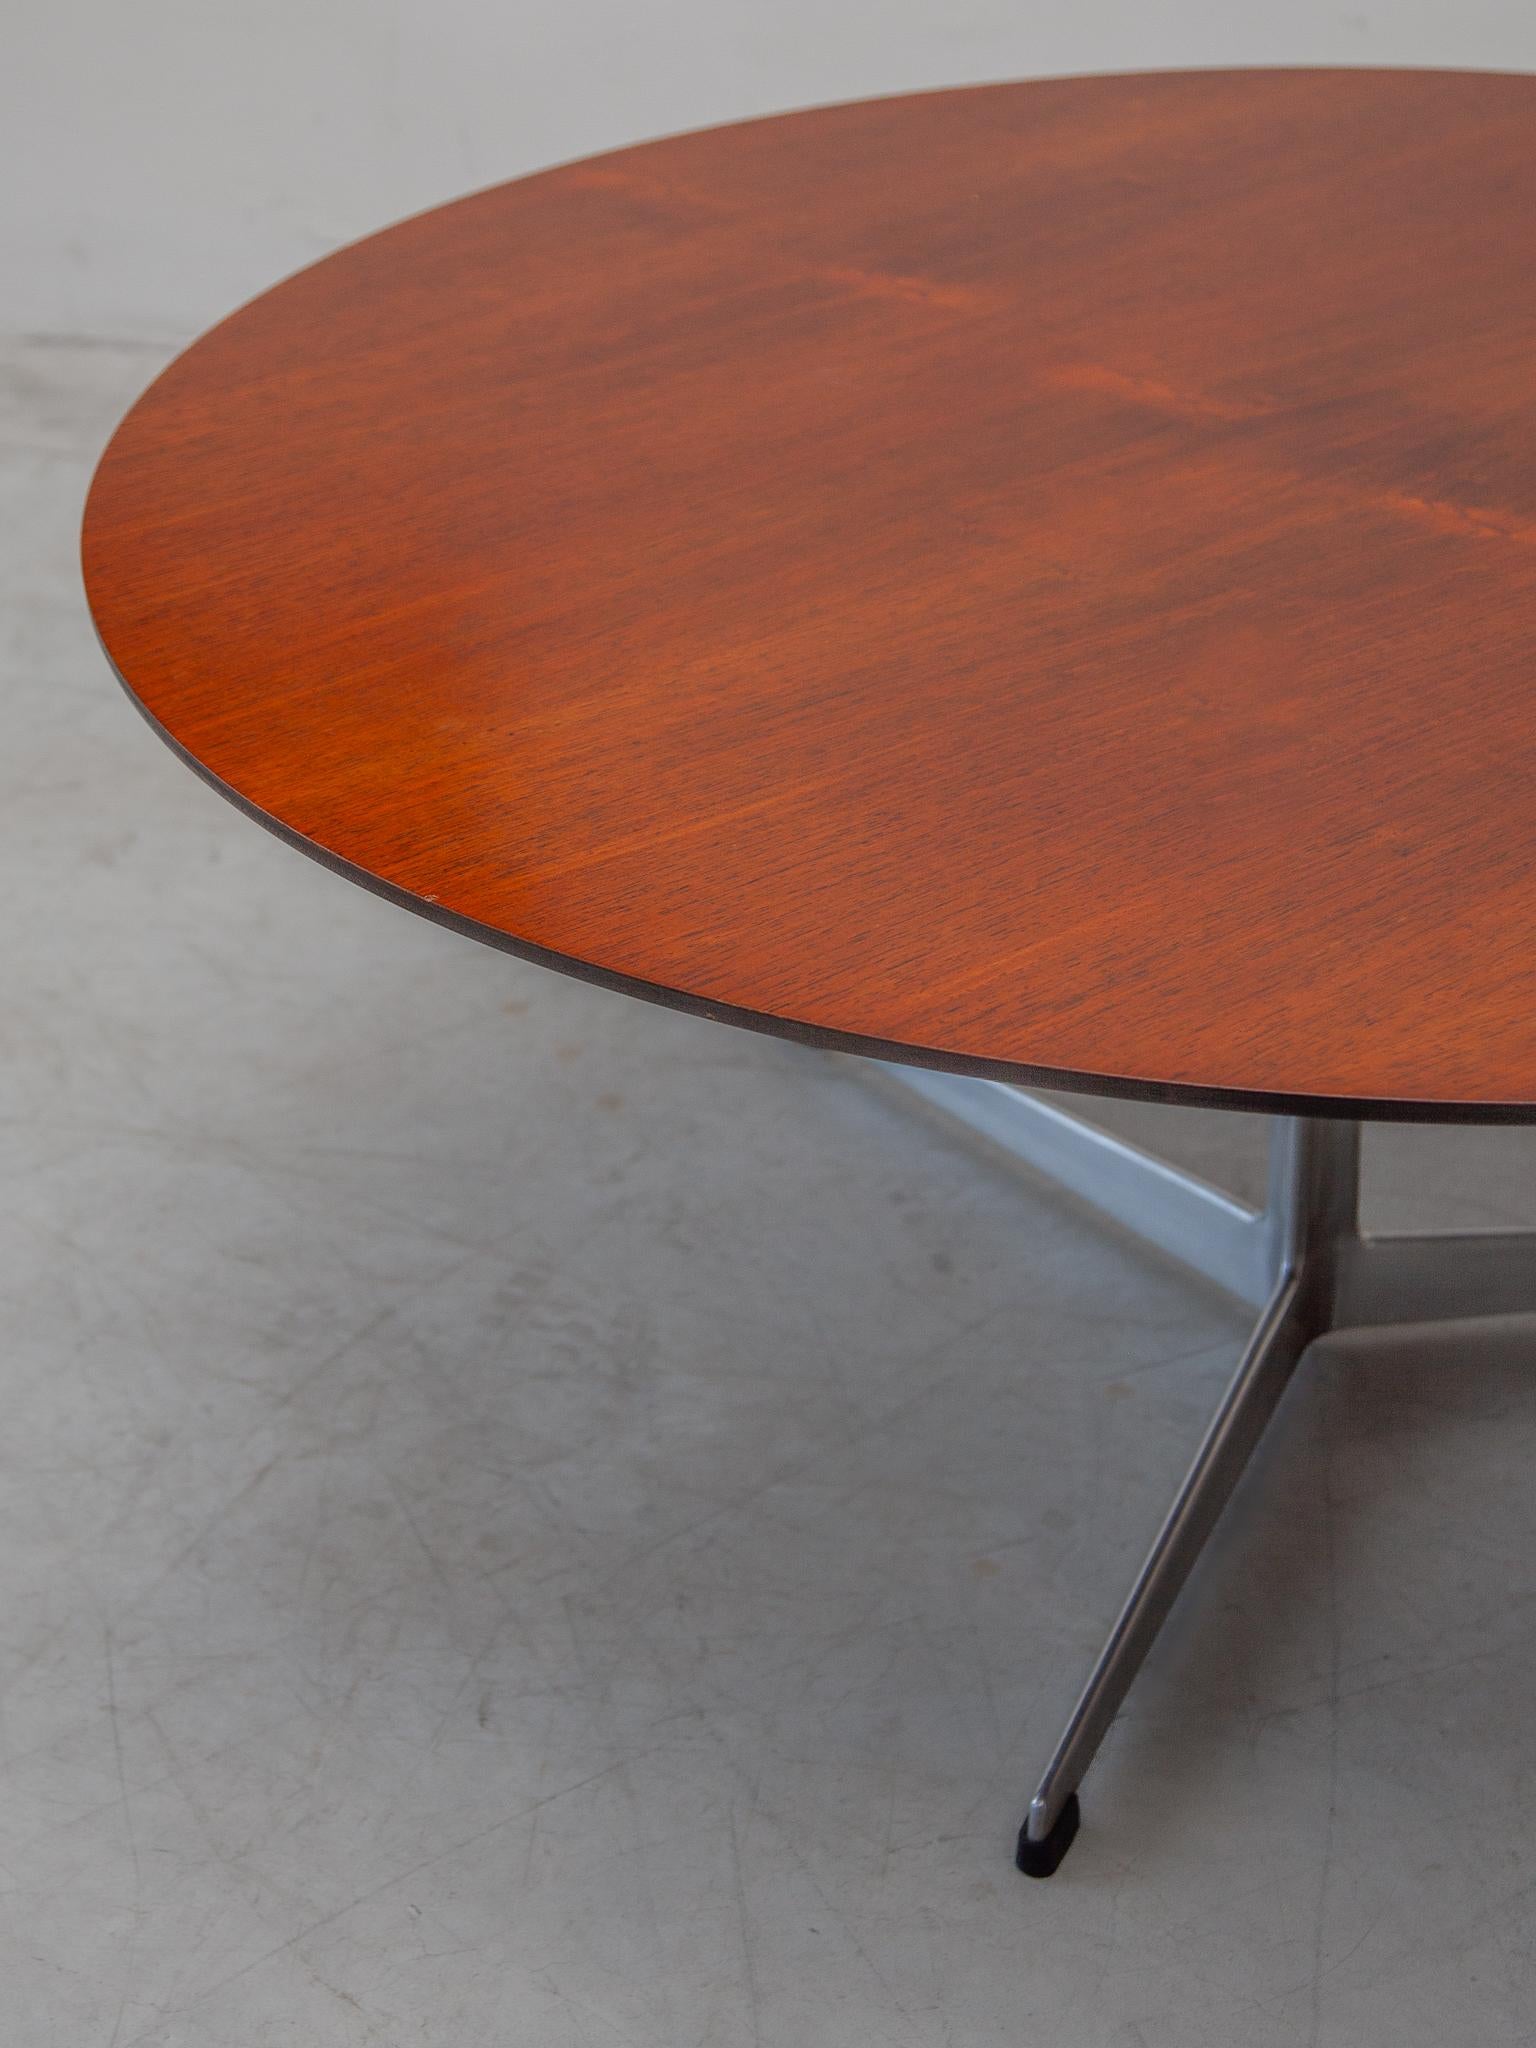 Fritz Hansen Round Coffee Table designed by Arne Jacobsen In Good Condition For Sale In Antwerp, BE